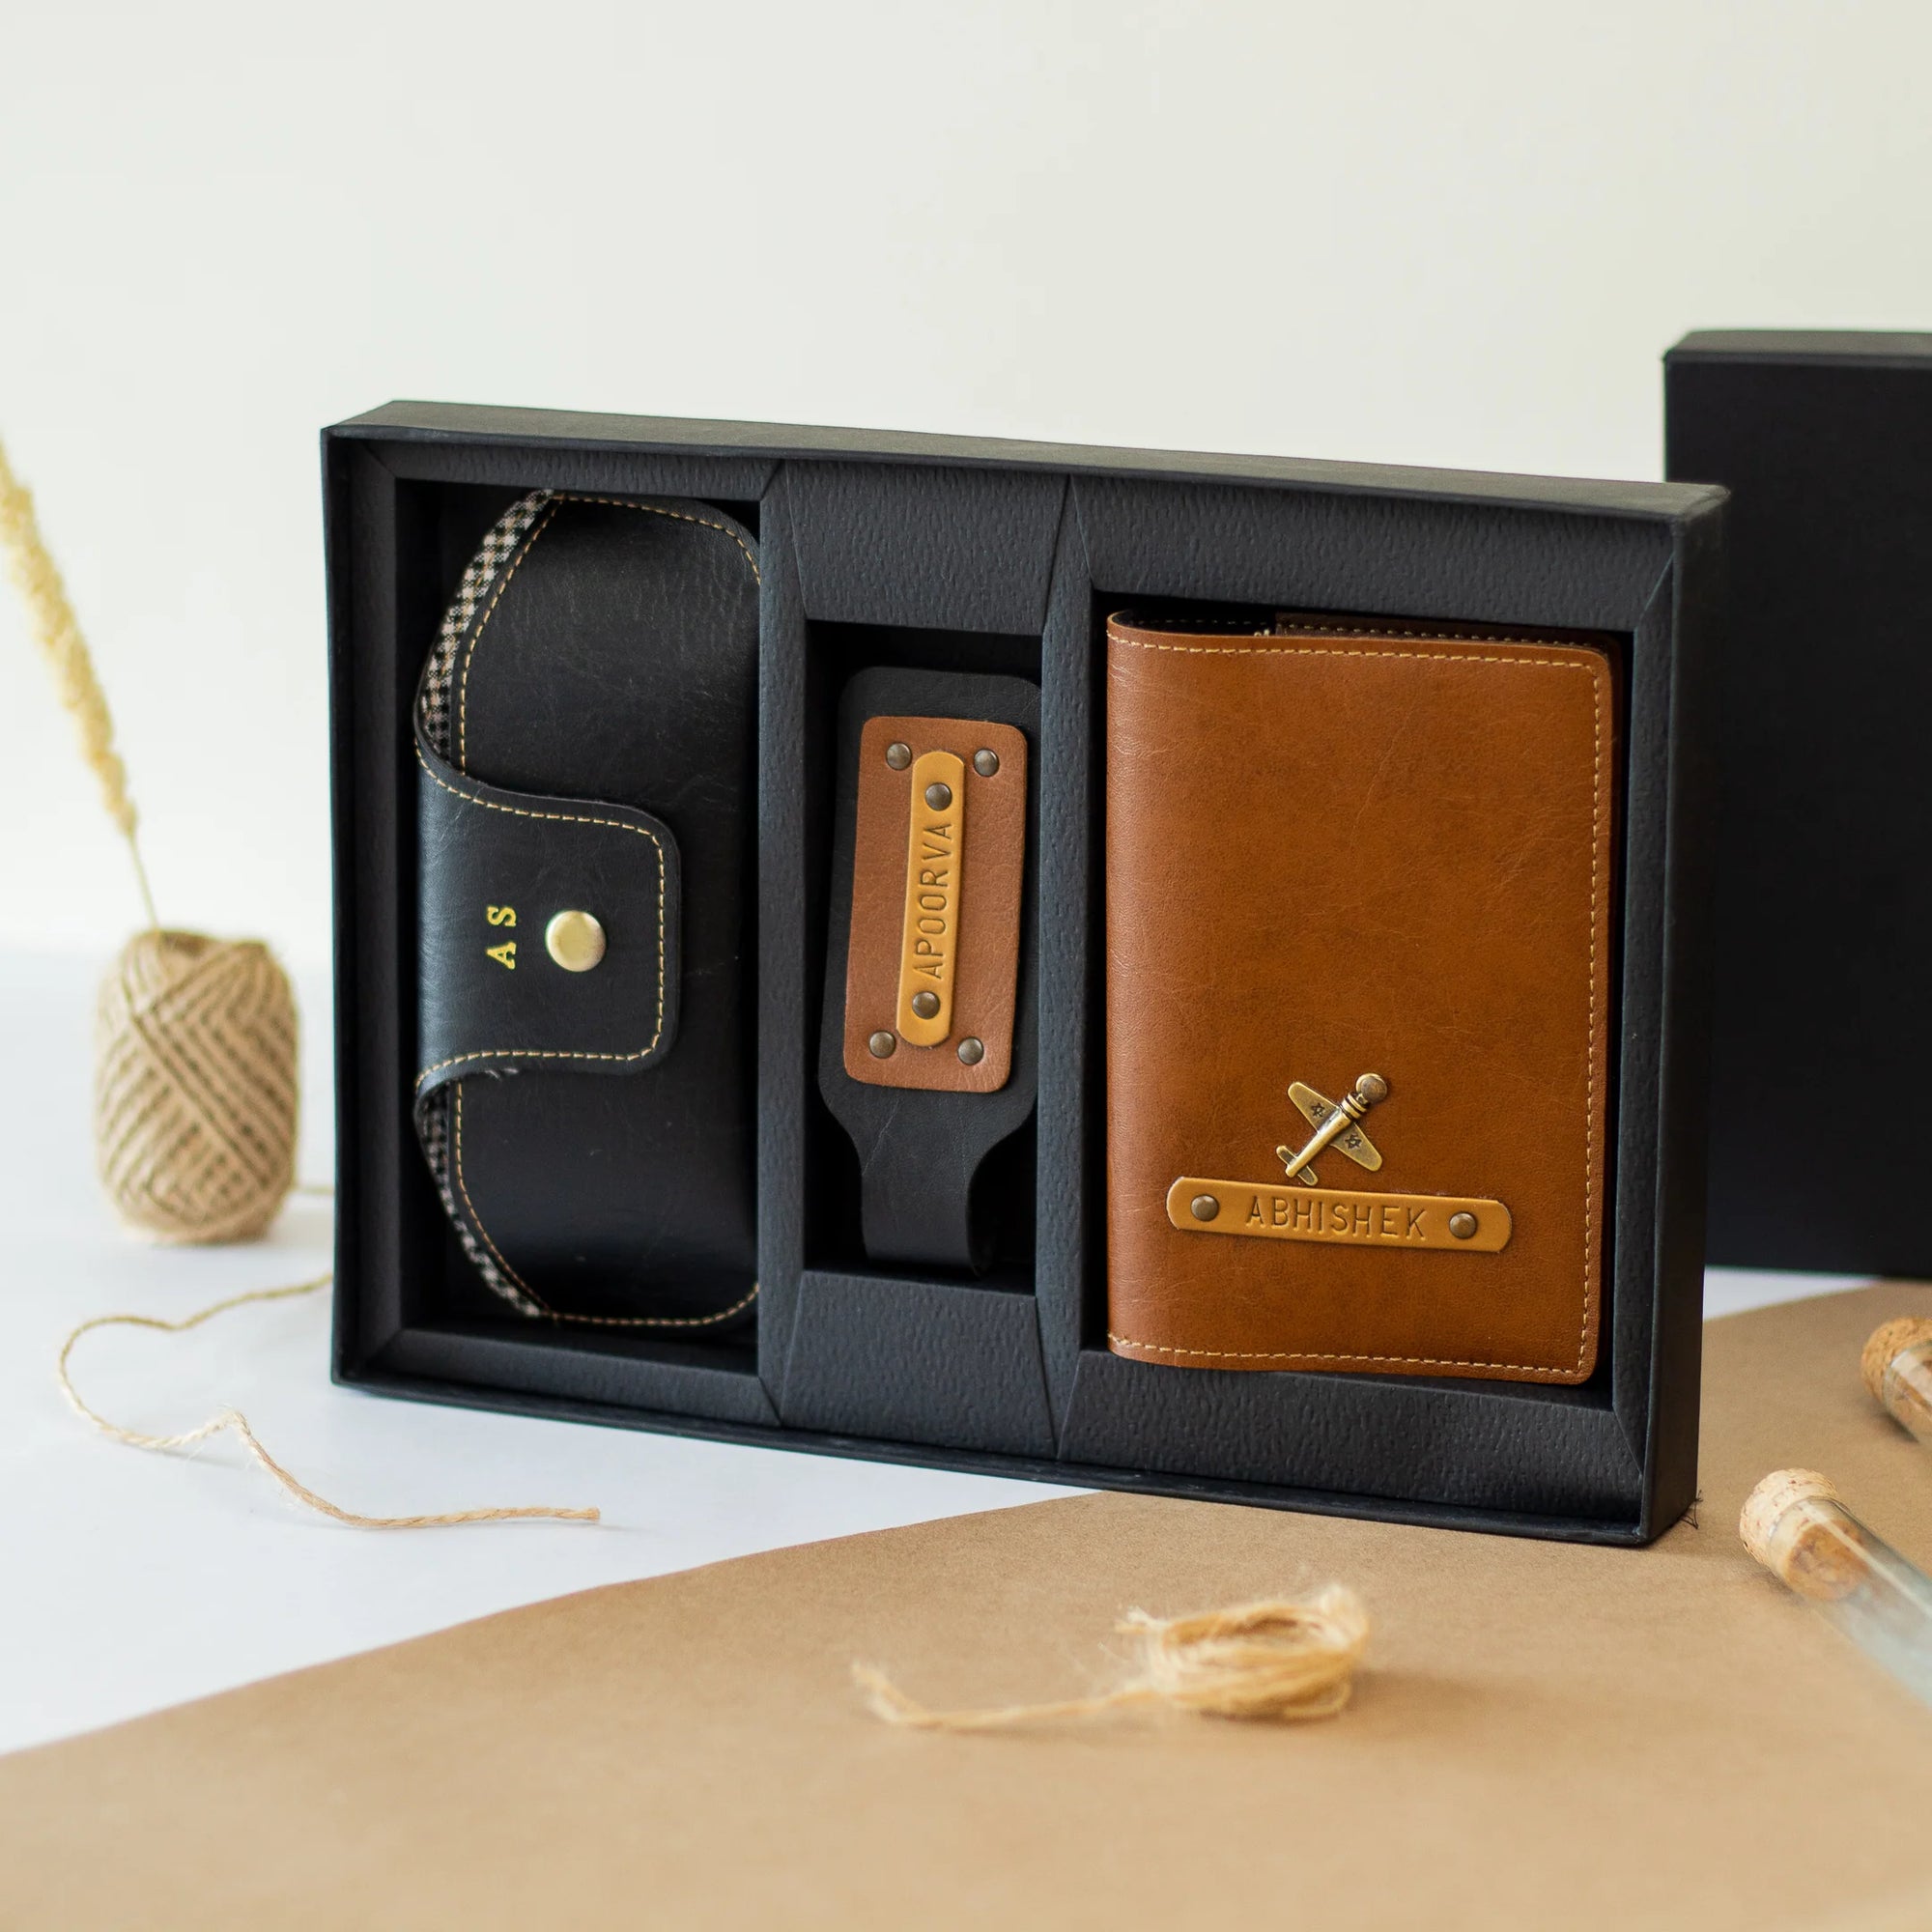 Elevate Your Corporate Gifting with Personalized Touches